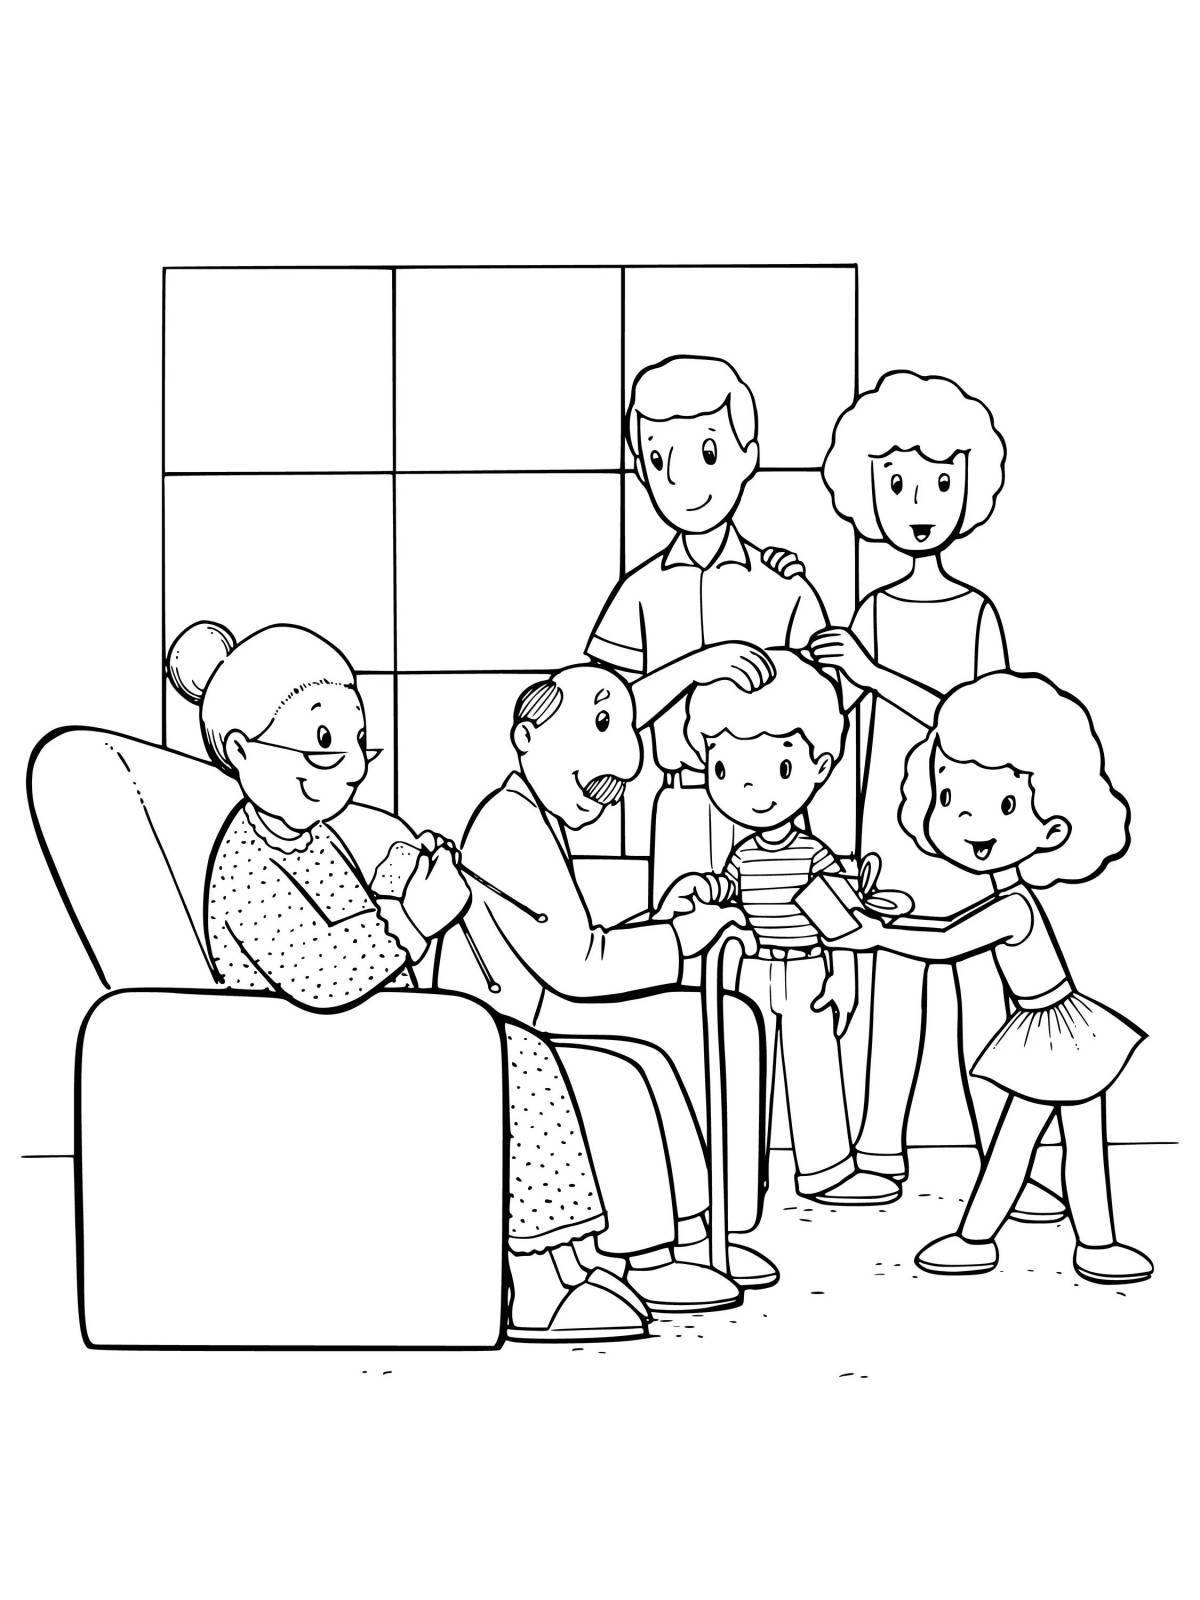 Unified family coloring